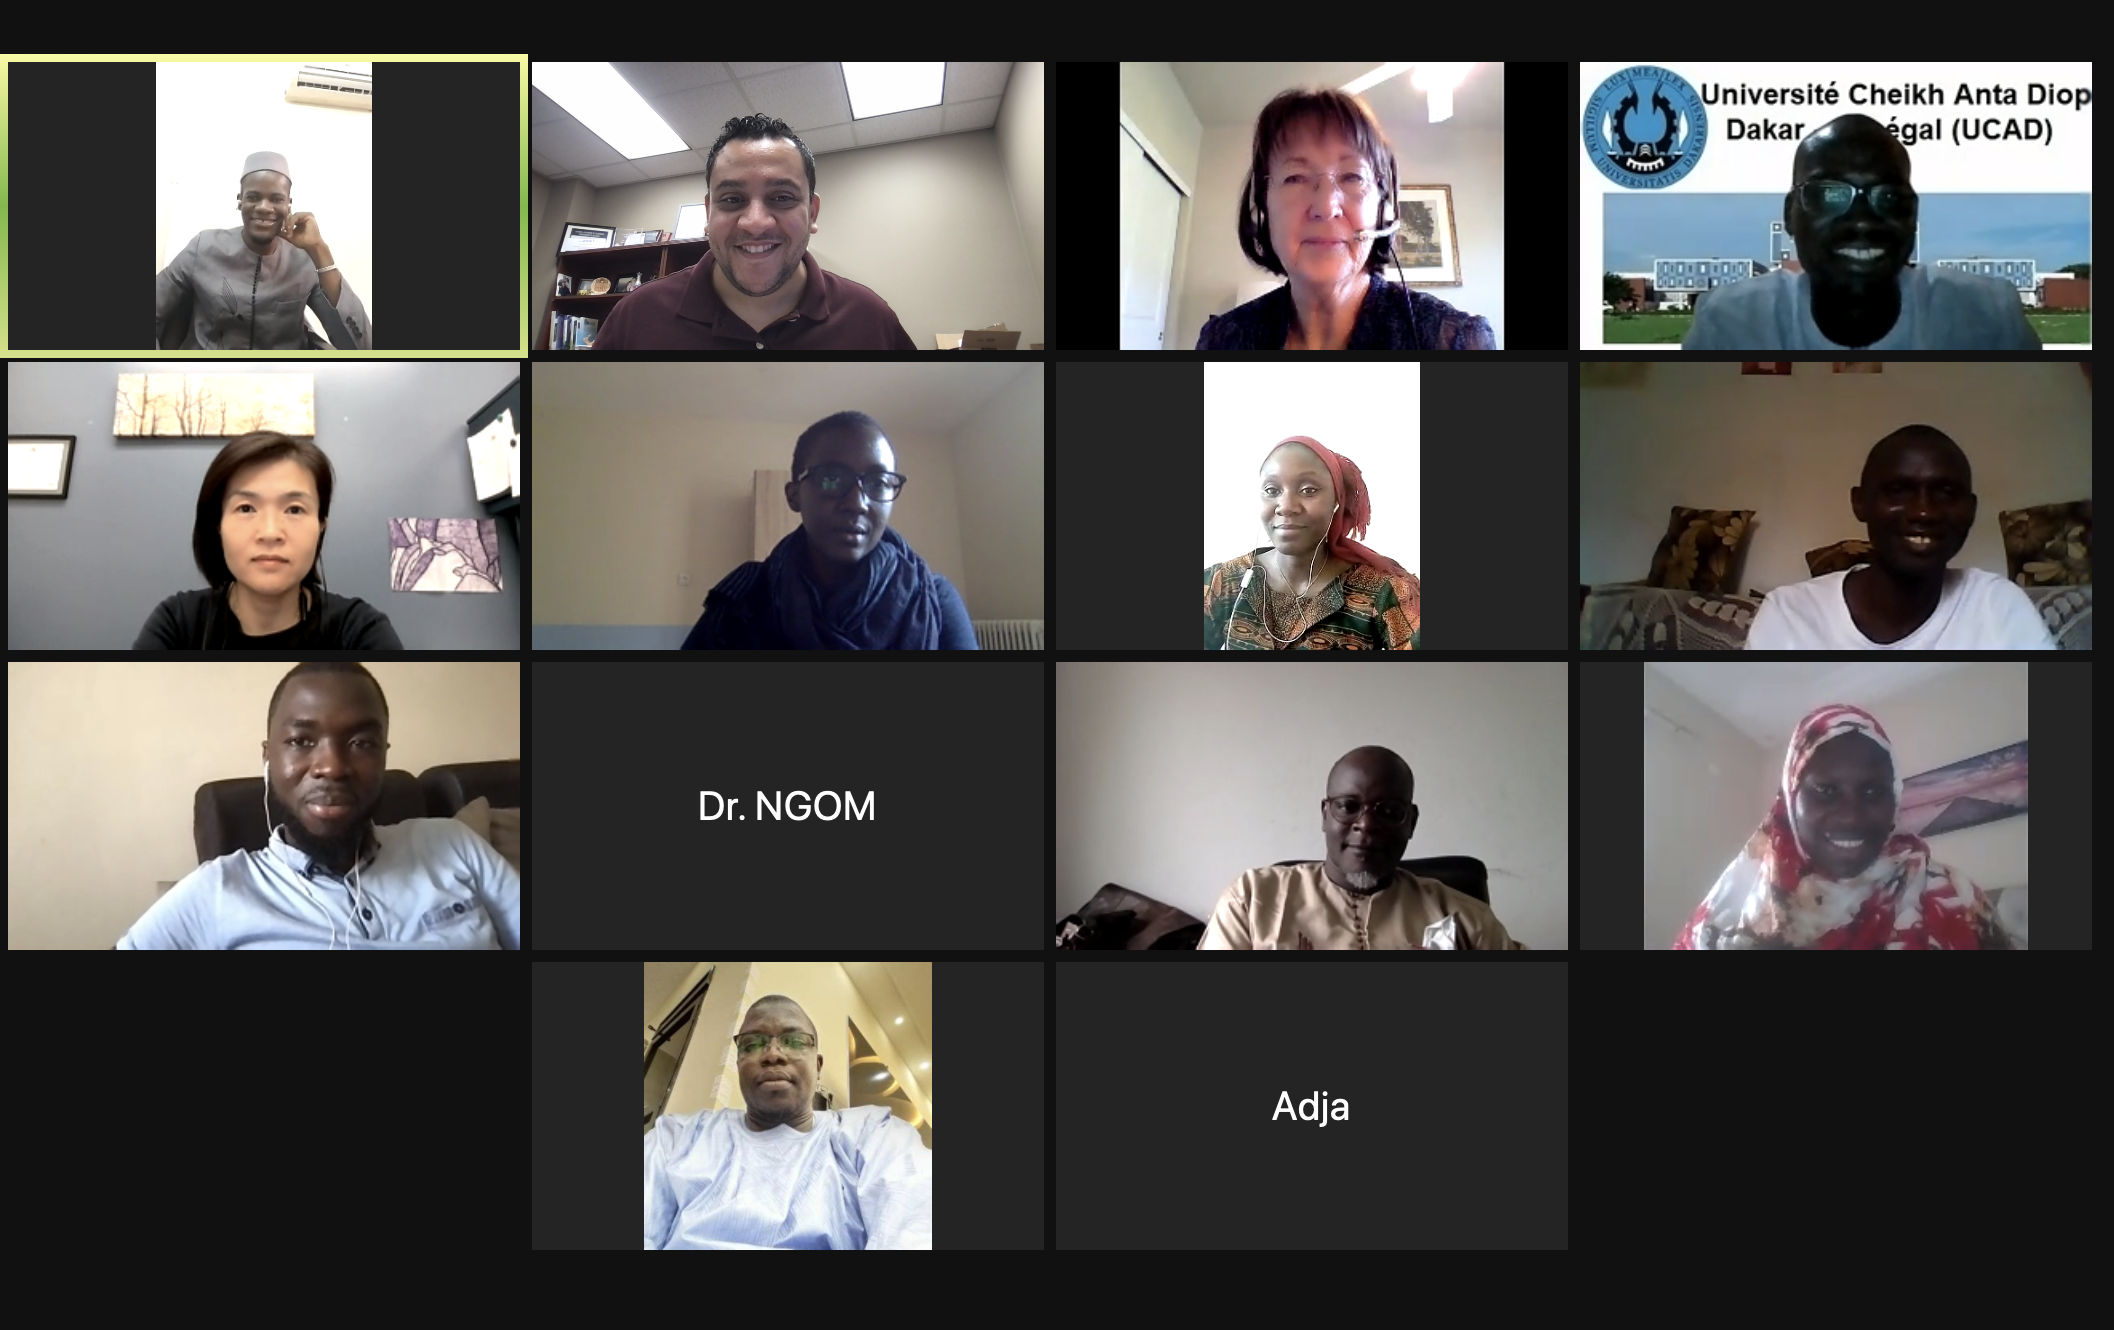 Photo Credit: A screenshot of participants on zoom